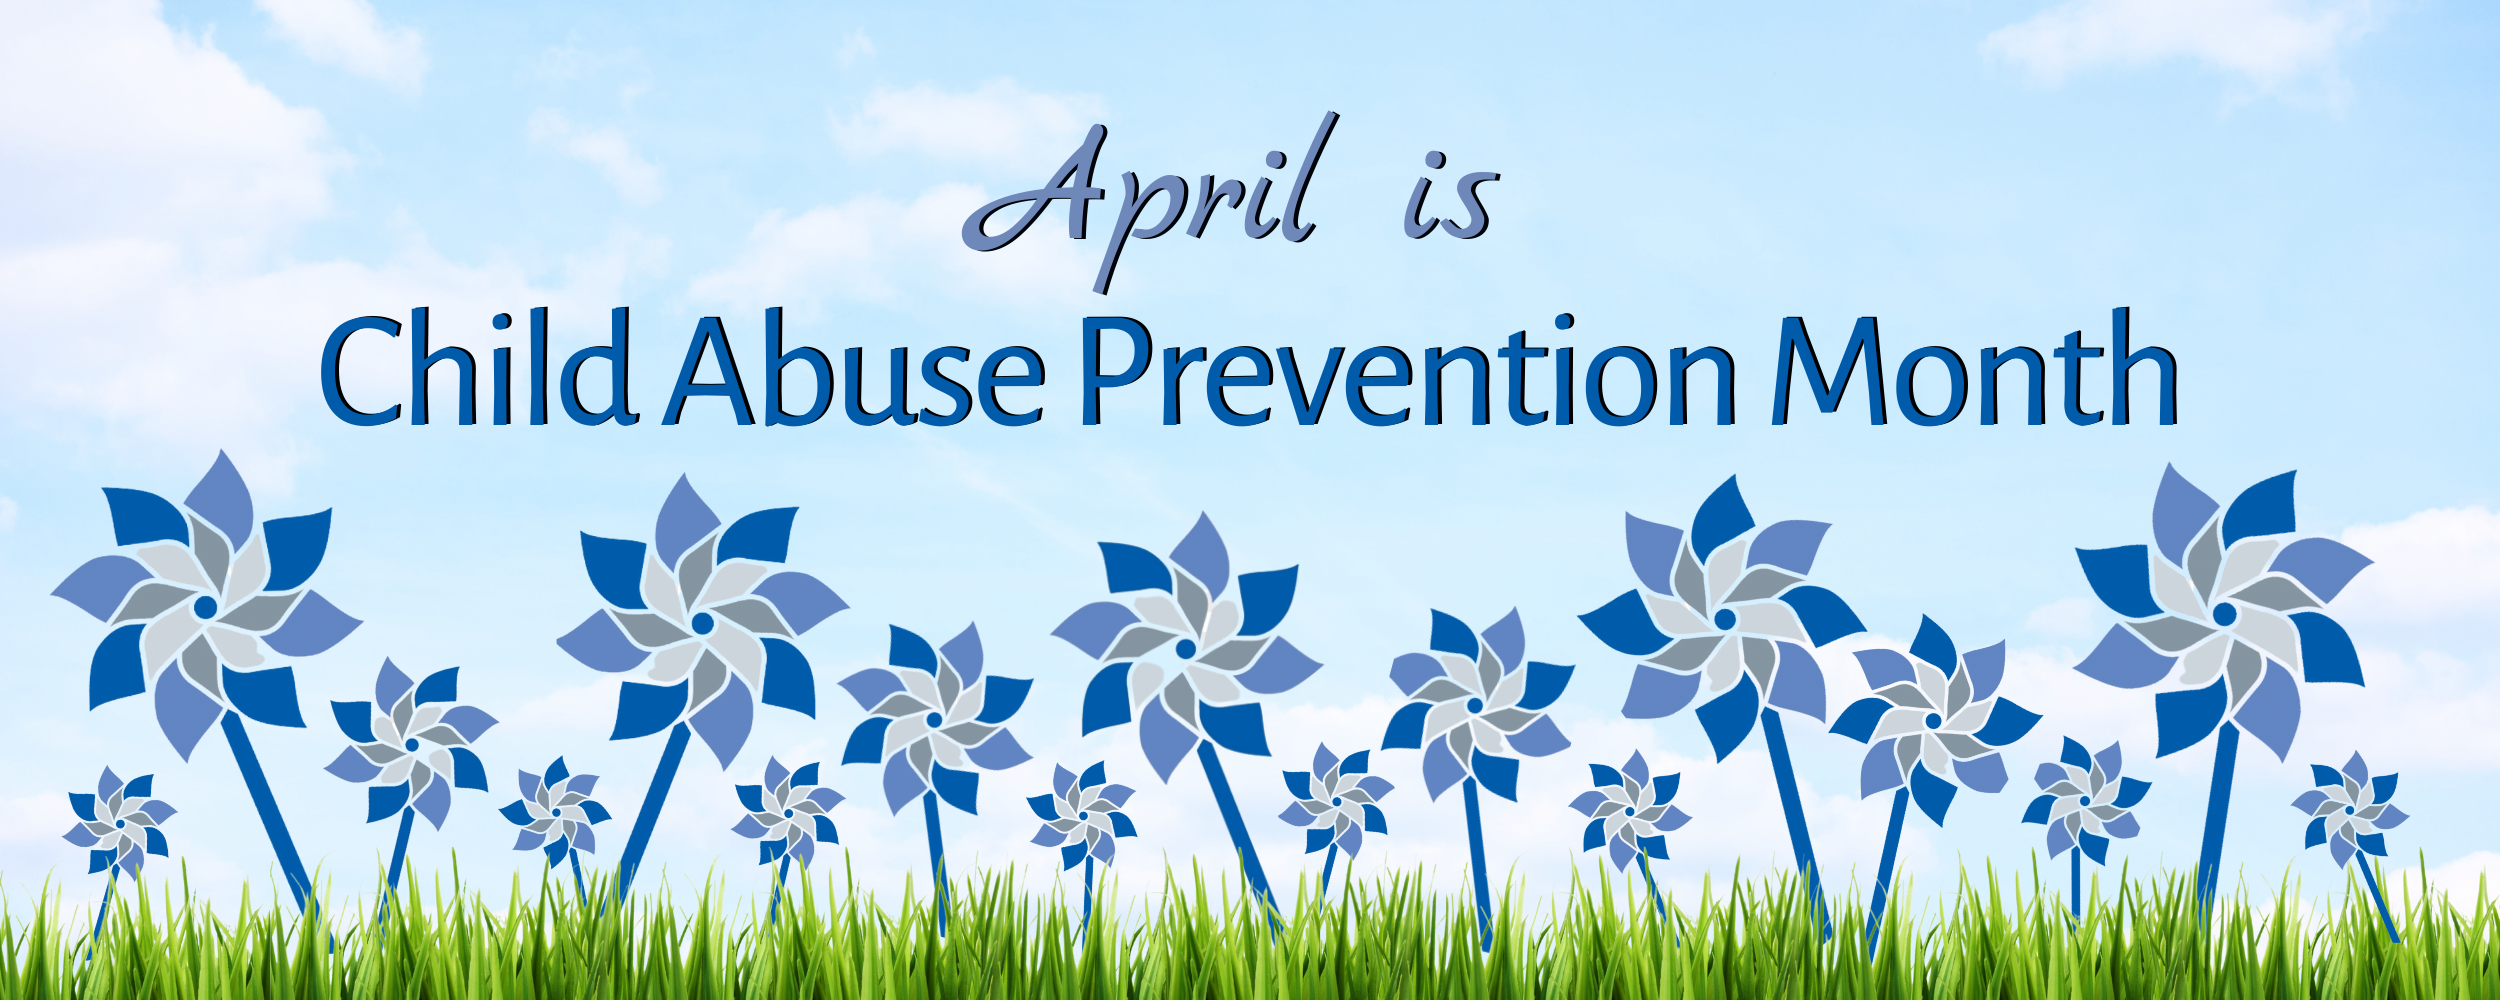 Child Abuse Prevention Month webpage banner with drawings of pinwheels in grass with a blue sky background